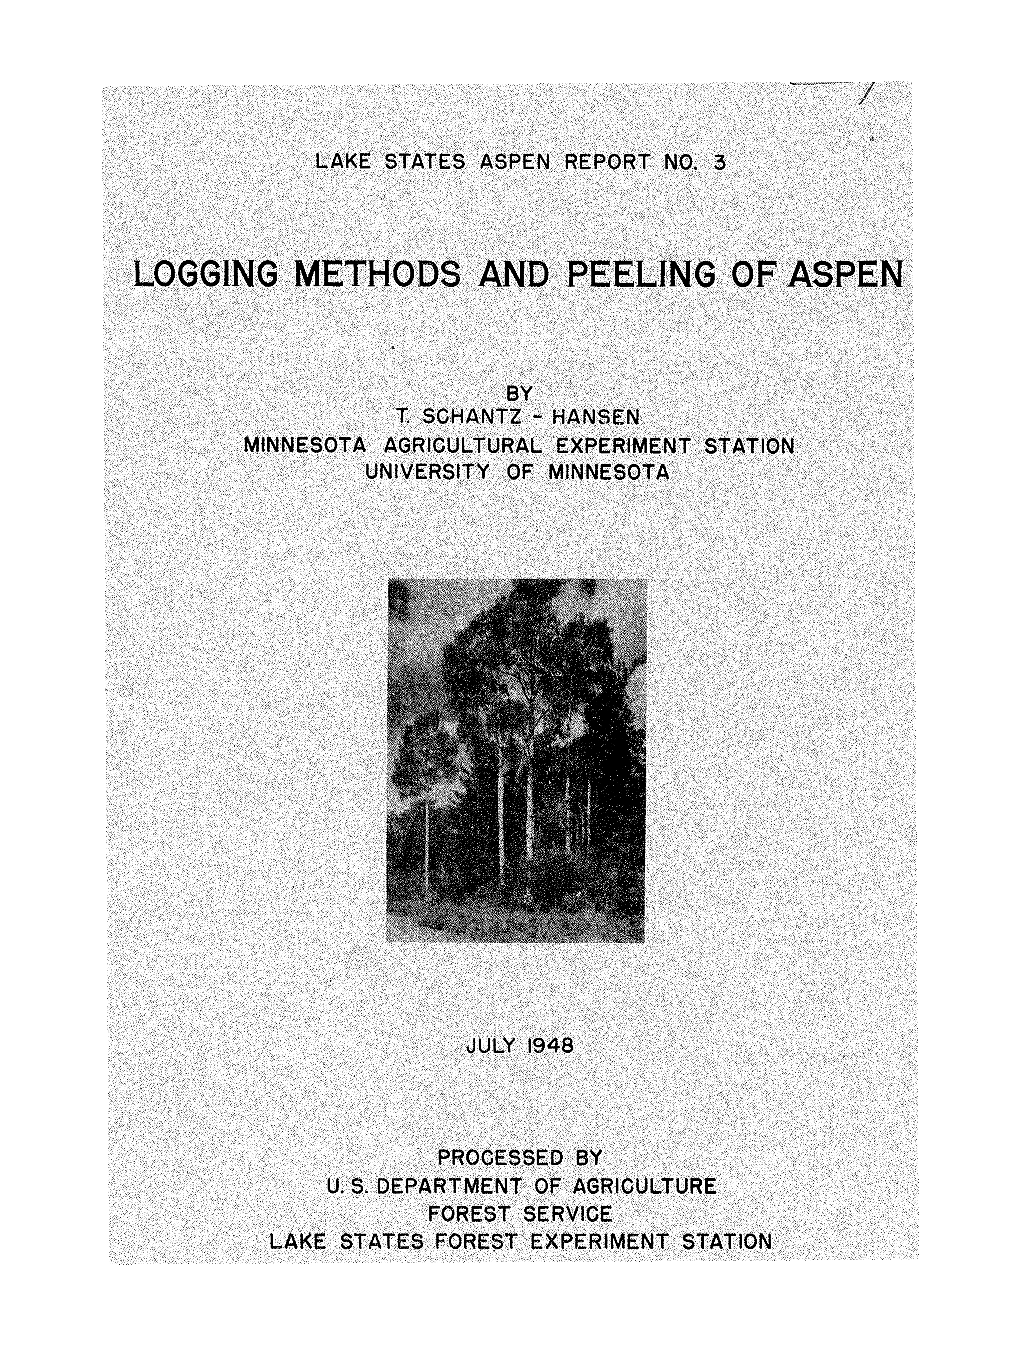 LOGGING METHODS and PEELING of ASPEN,!./ by T